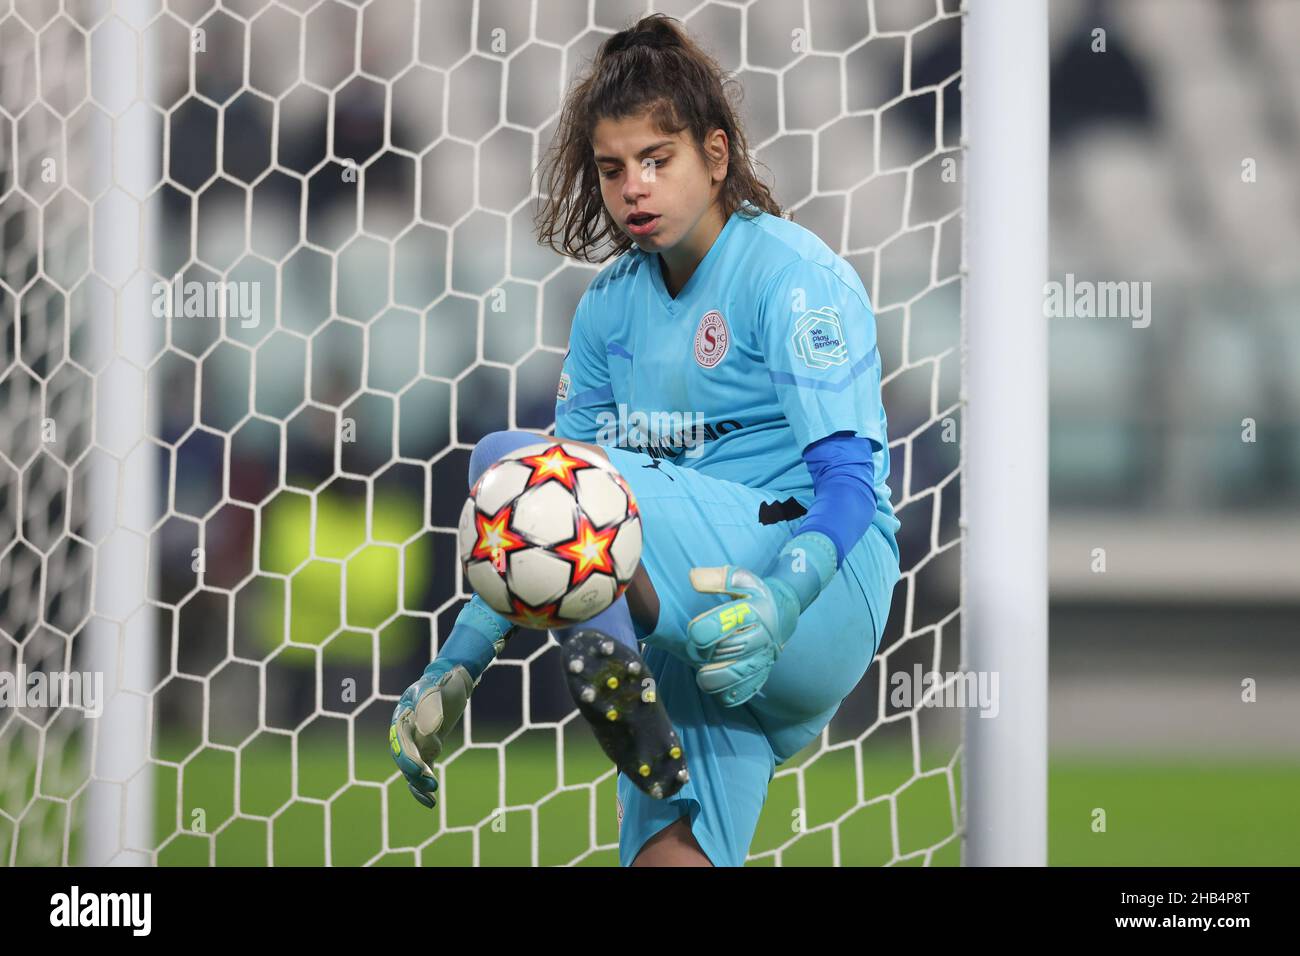 Leiria, Portugal. 17th Mar, 2021. Sporting Goalkeeper Ines Pereira warm up  during the women´s League Cup (2020/21) Final game between Benfica and  Sporting at the Estádio Municipal Dr. Magalhães Pessoa in Leiria